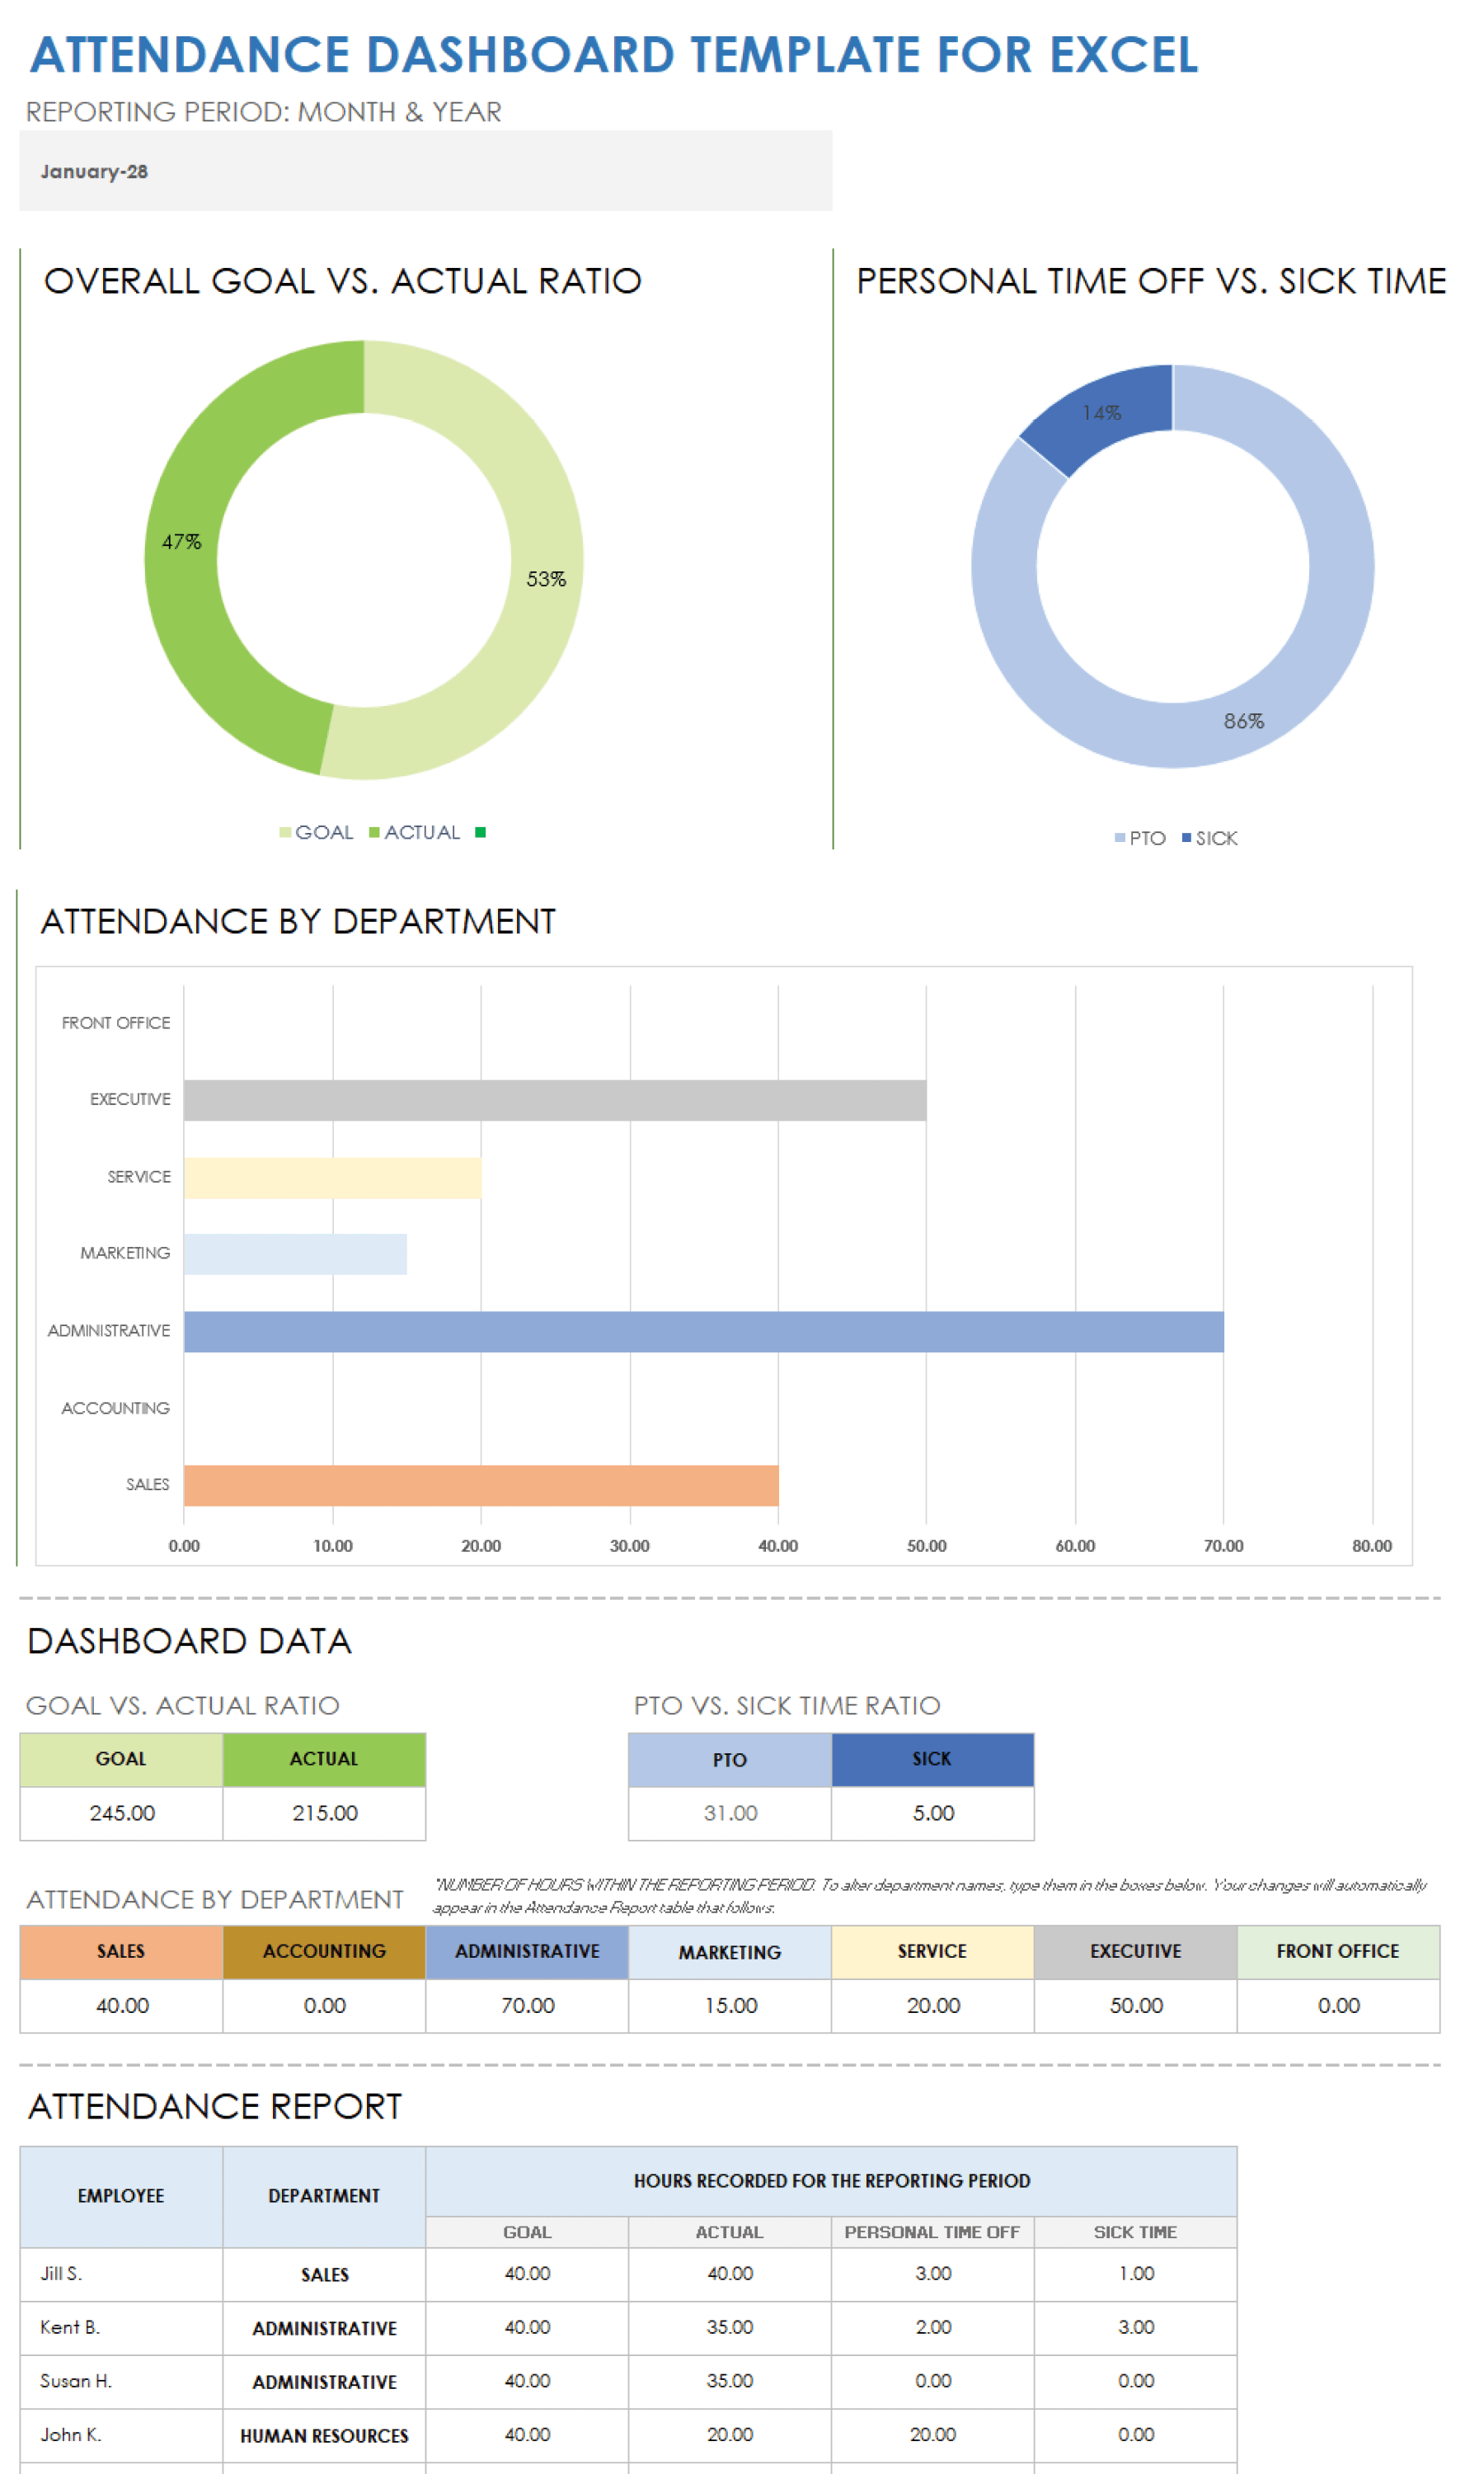 Attendance Dashboard Template for Excel